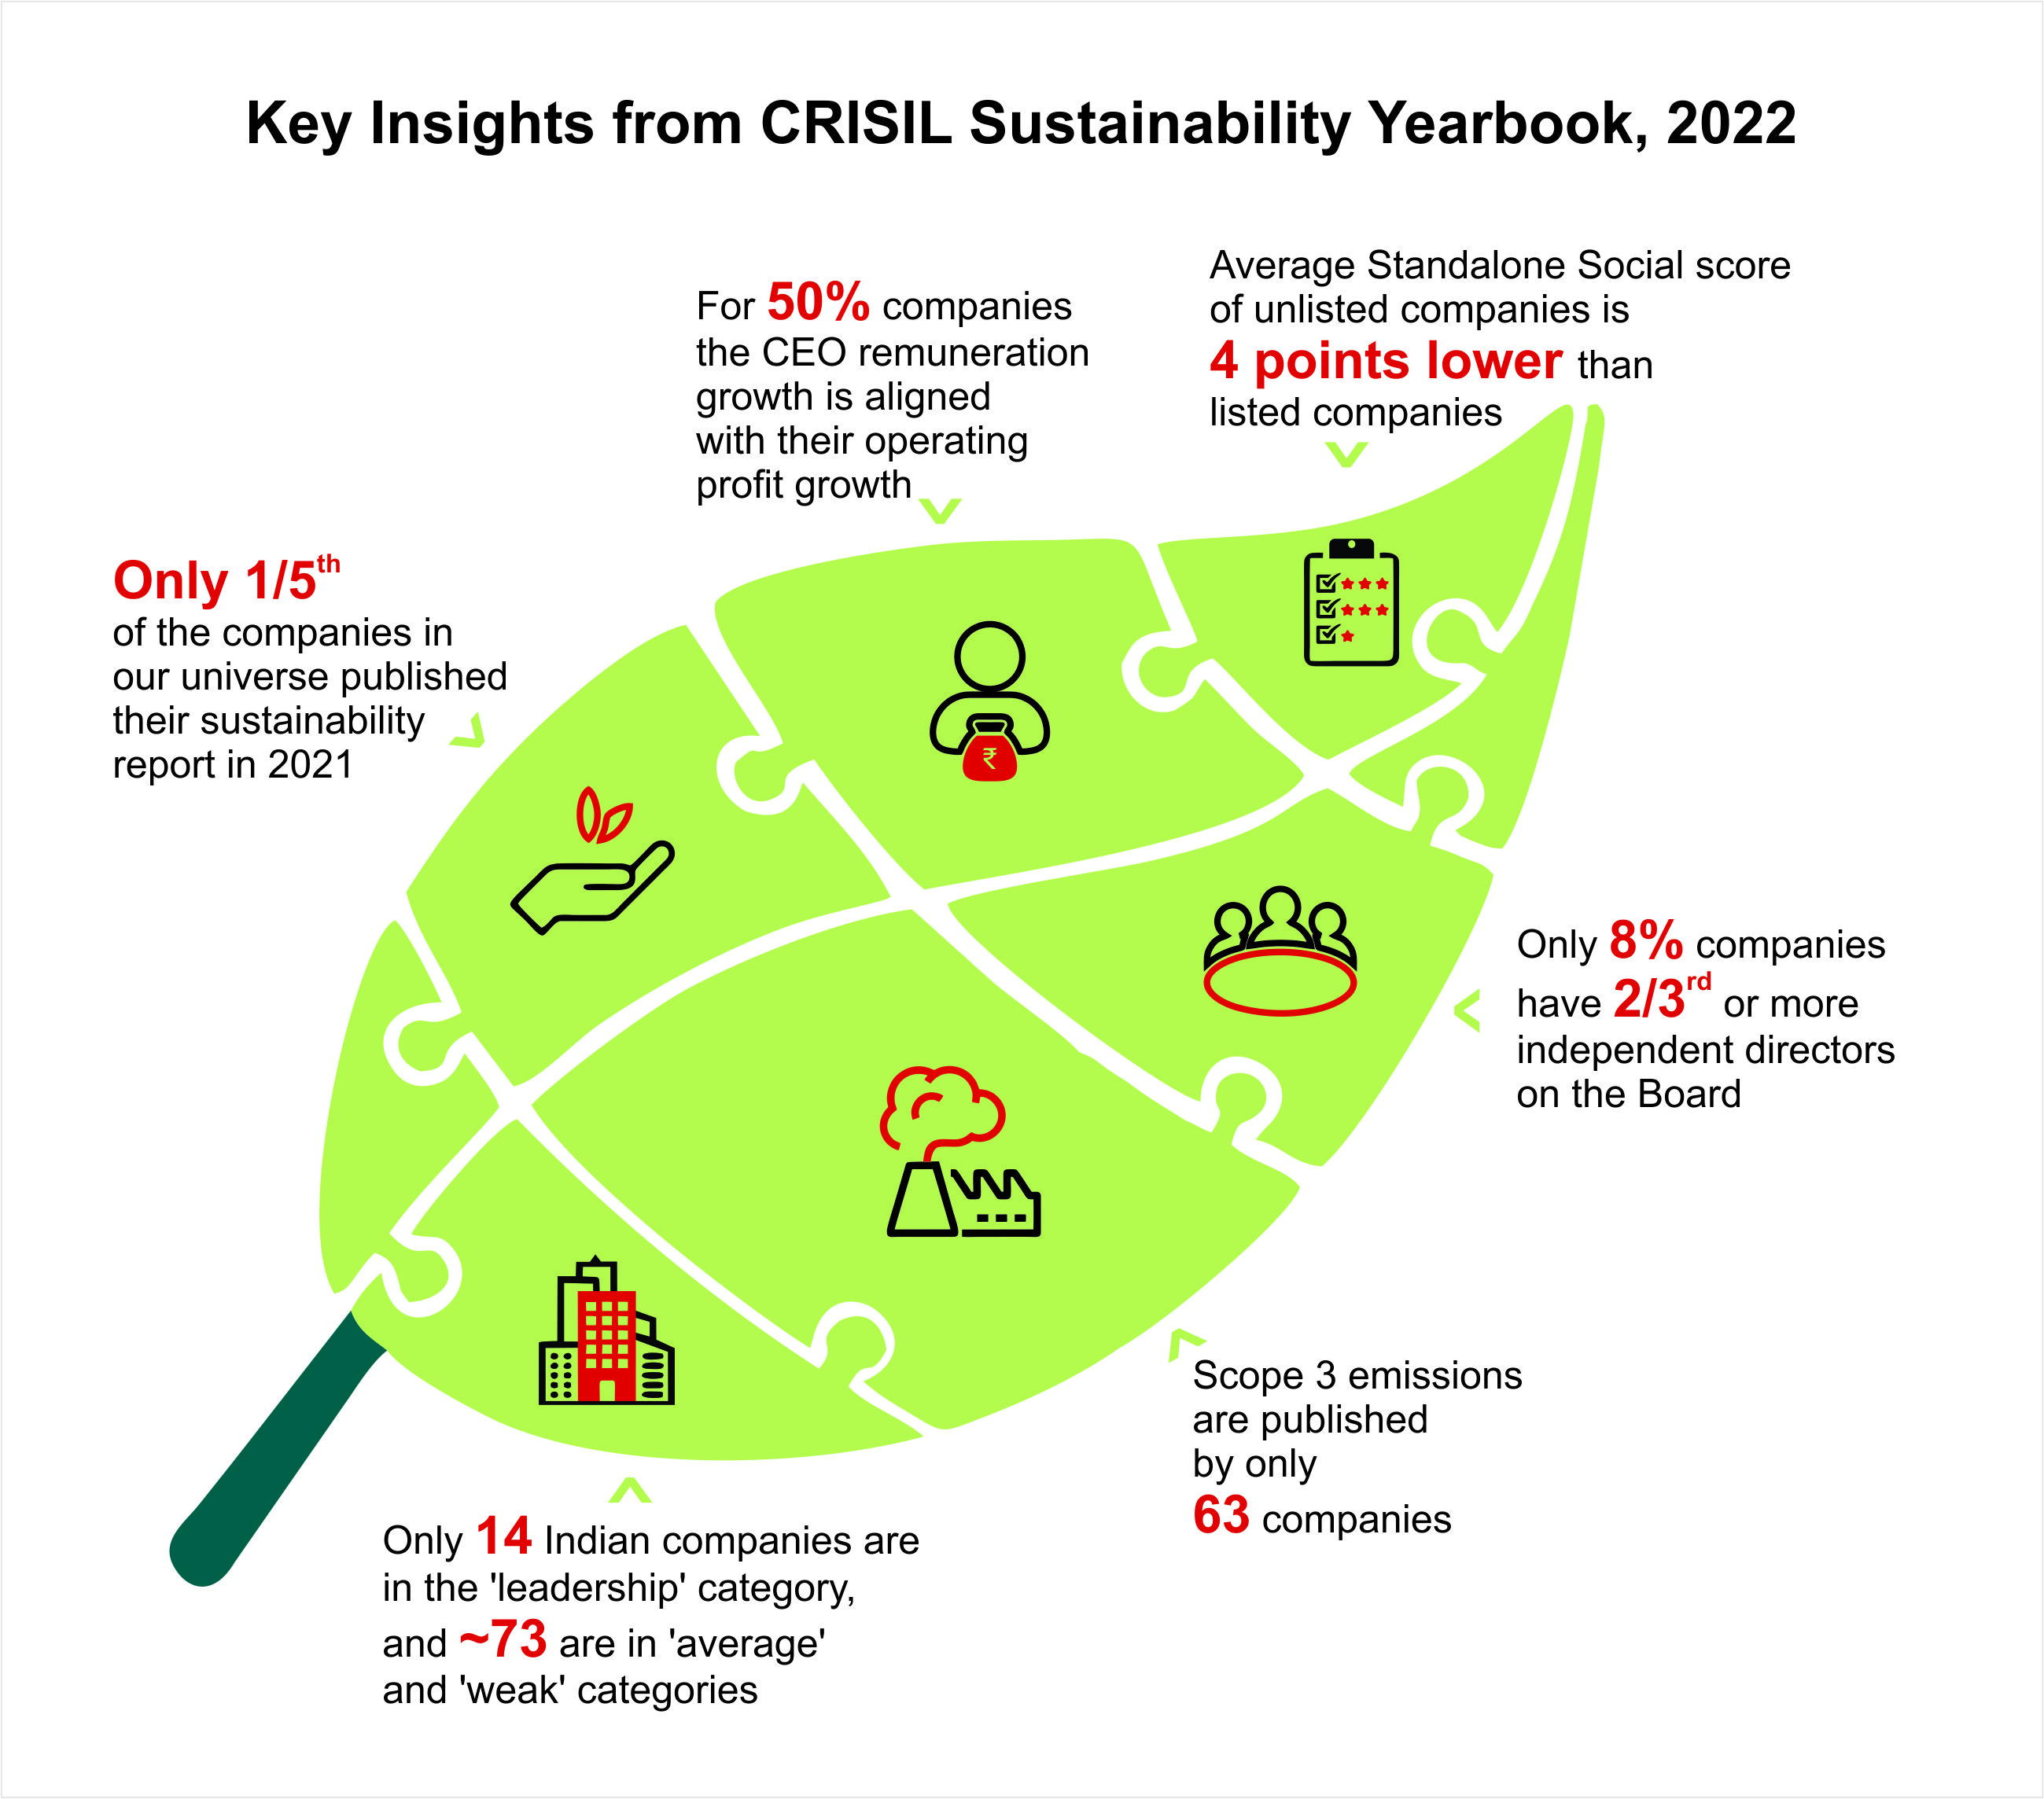 Key insights from CRISIL Sustainability Yearbook, 2022